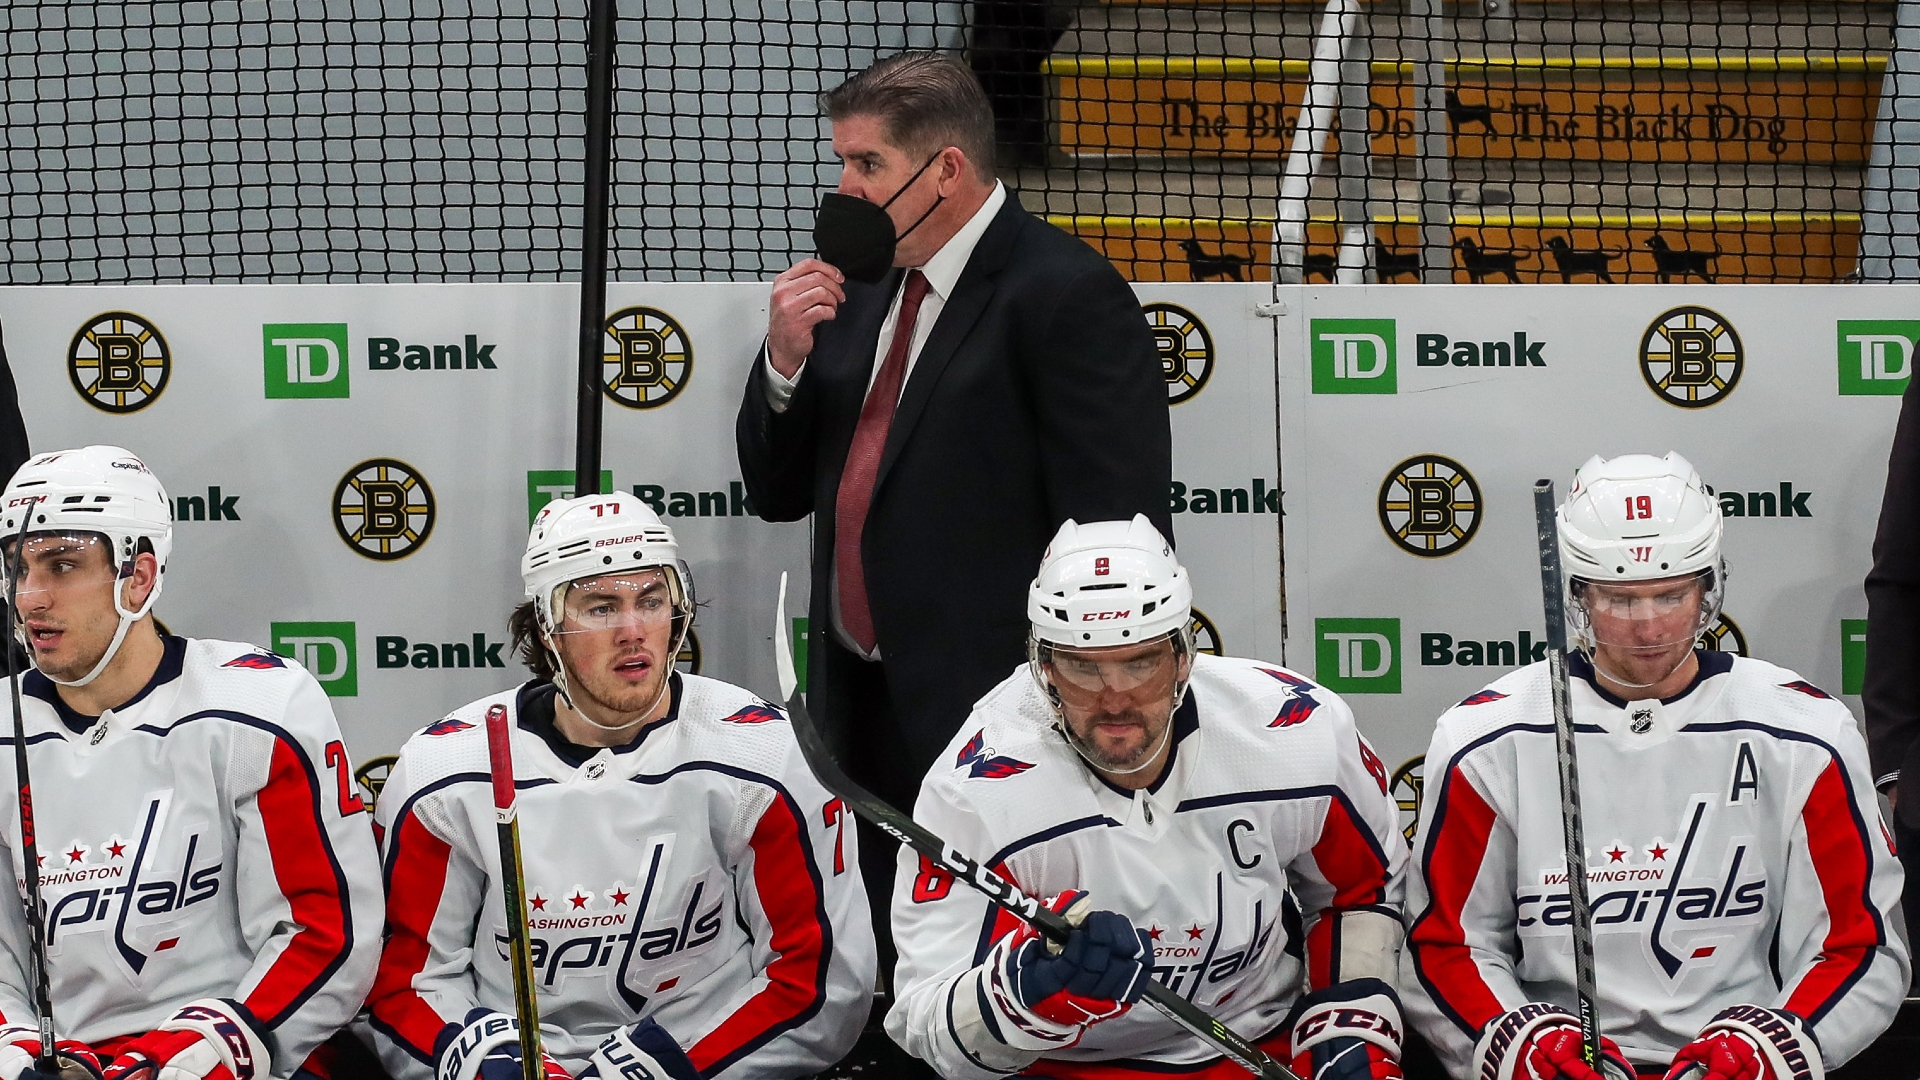 Peter Laviolette stands behind the Capitals' bench